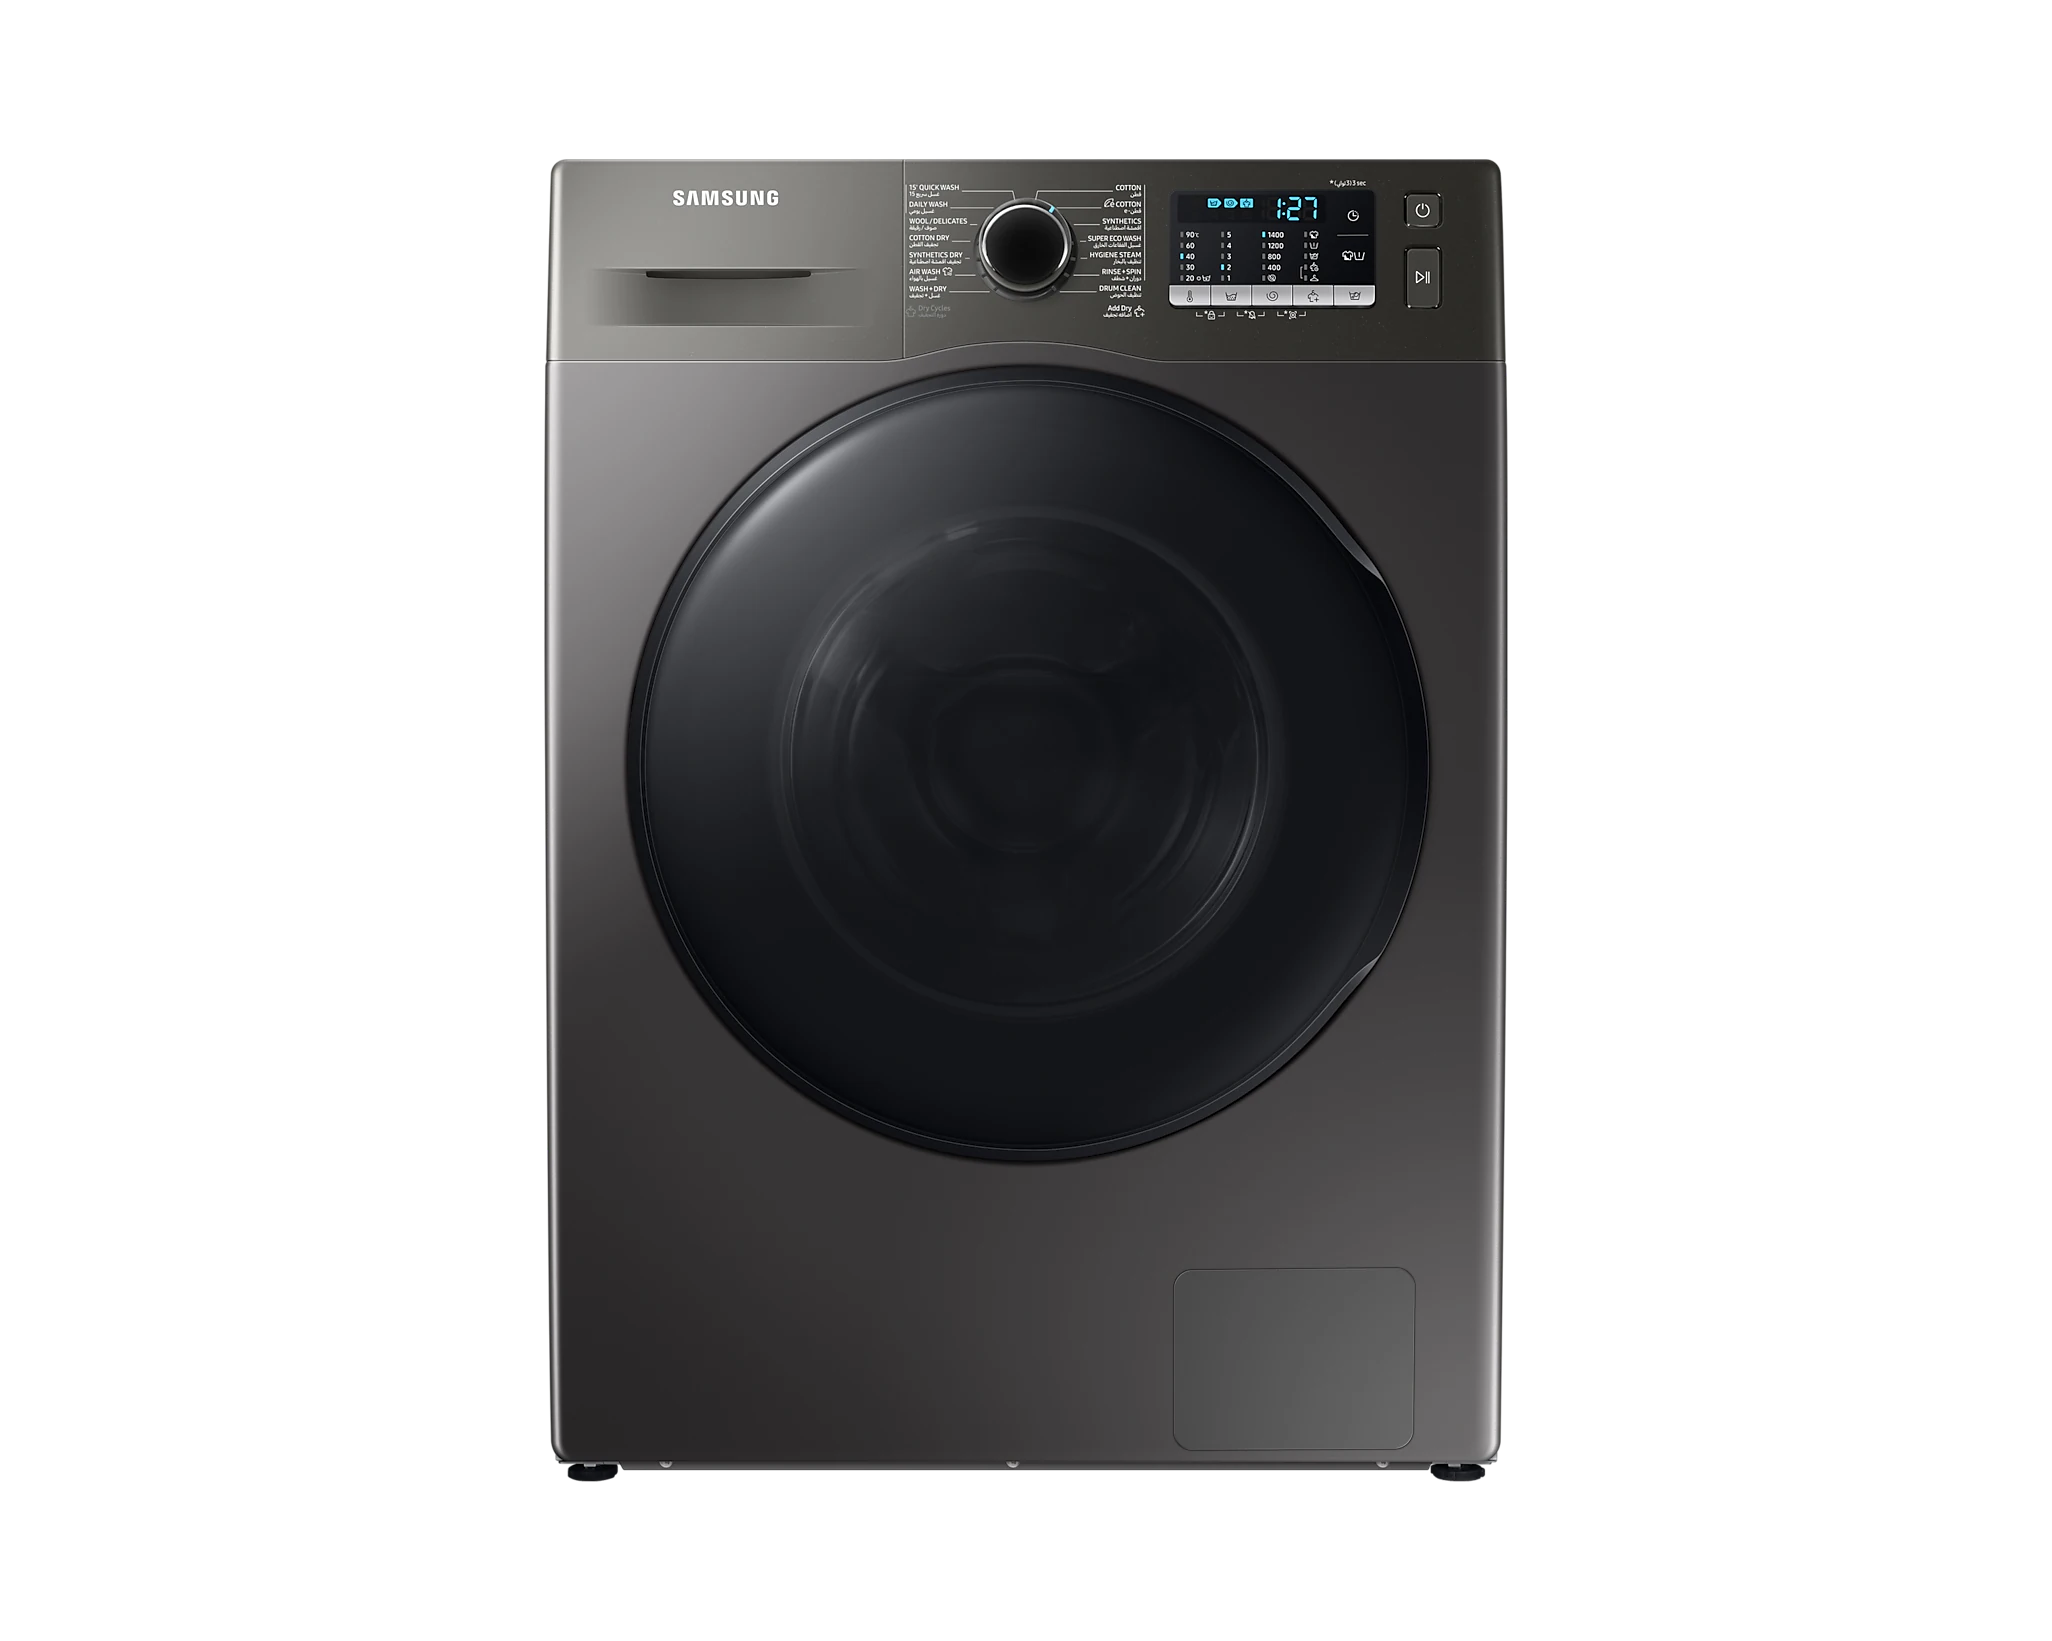 Samsung 8 Kg Washer 6 Kg Dryer Front Load Combo With Hygiene Steam 1400 RPM Color Silver Model – WD80TA046BX/GU – 1 Year Full Warranty.